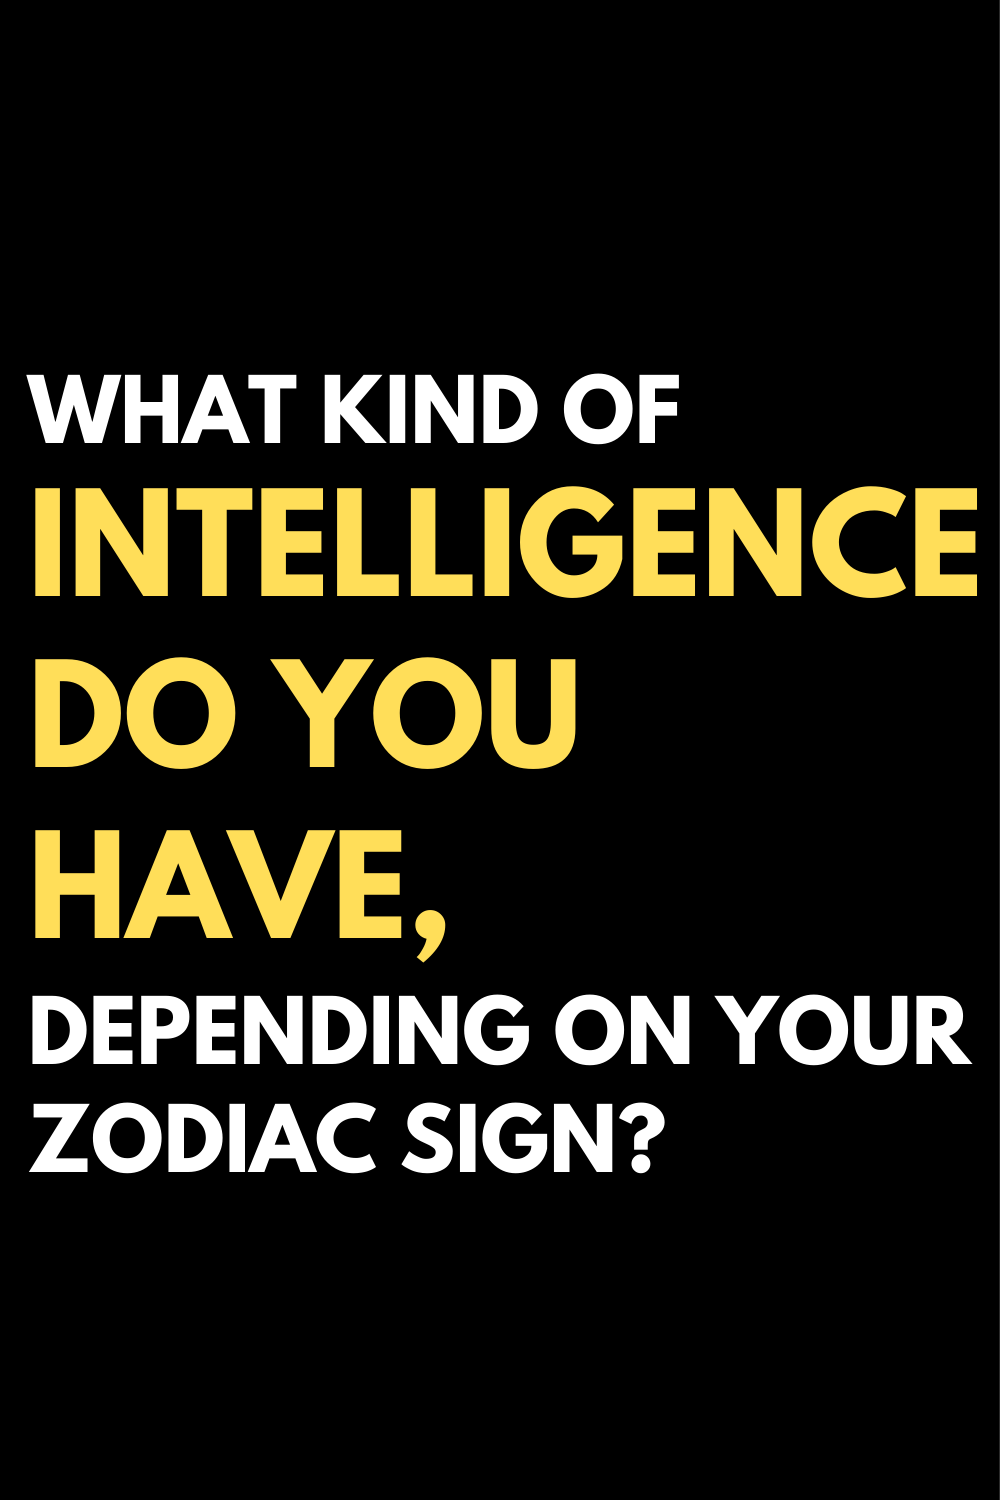 What kind of intelligence do you have, depending on your zodiac sign?